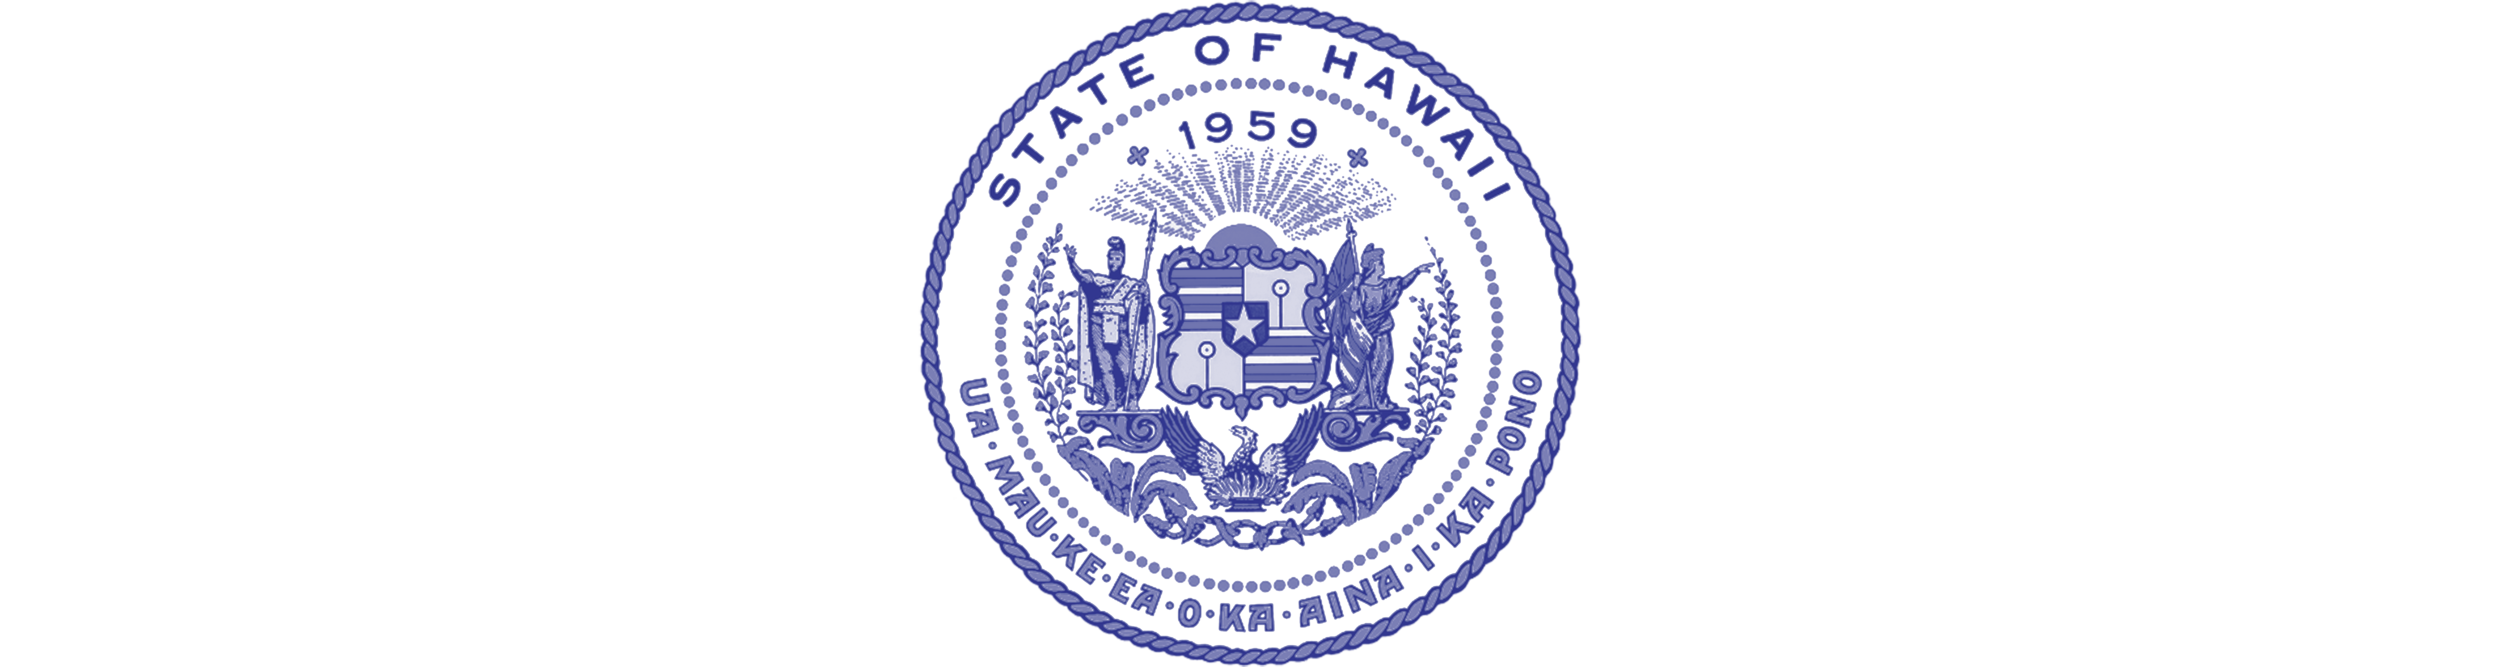 HPHA-resources-logo-State-Hawaii.png